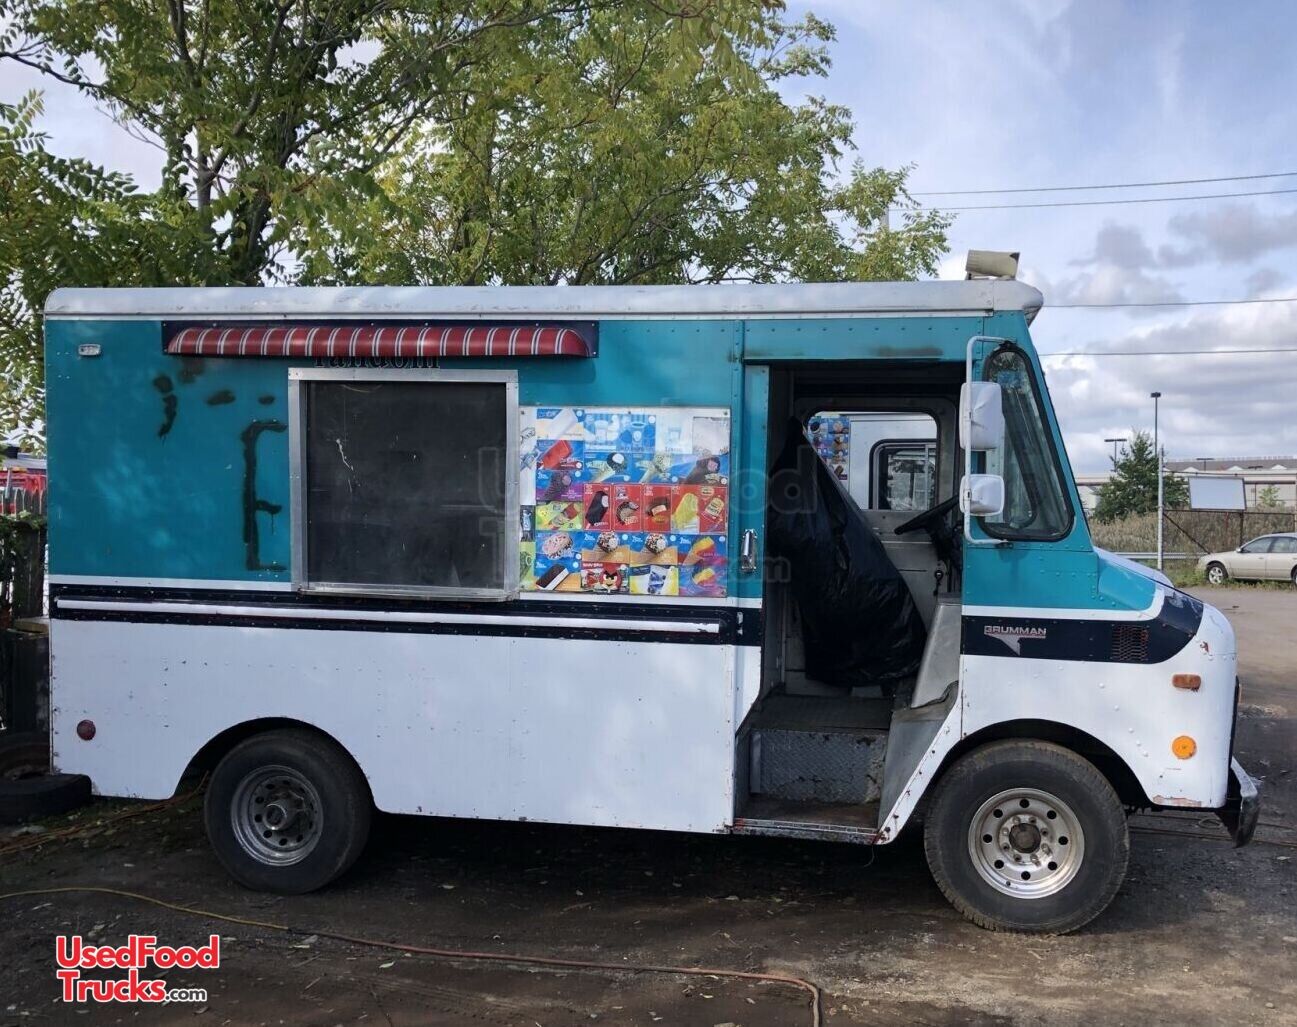 Used Chevrolet P-30 Ice Cream Truck Mobile Ice Cream Business for Sale in New 